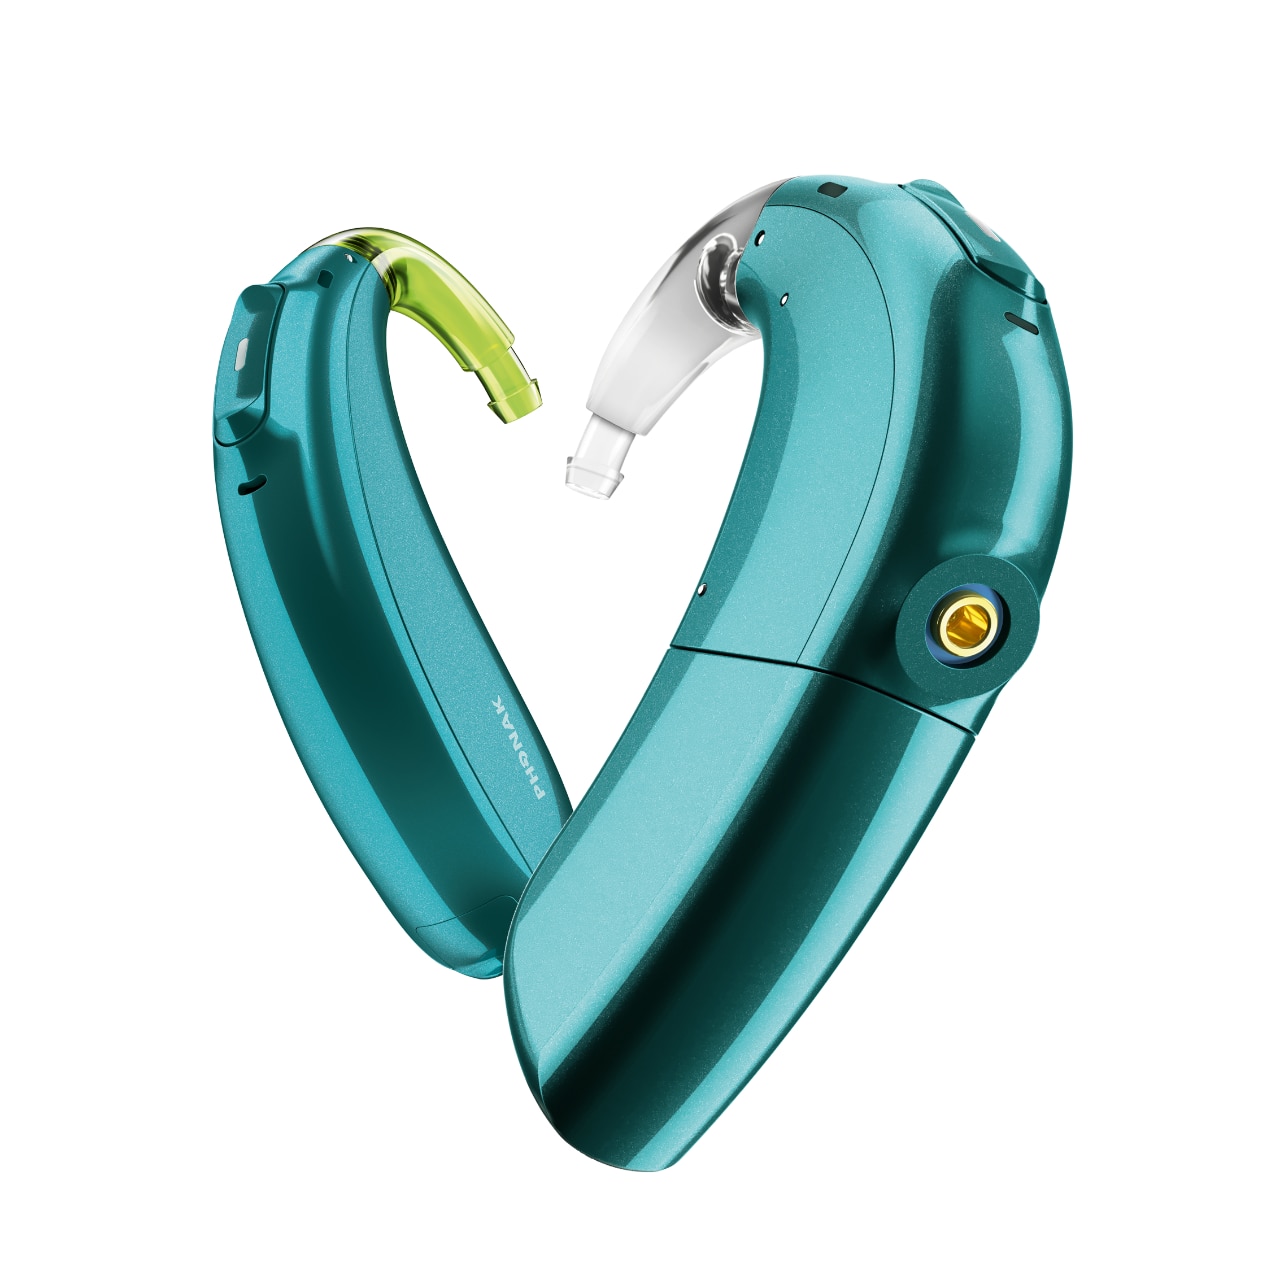 Advanced Bionics Receives FDA Approval for Marvel Cochlear Implant